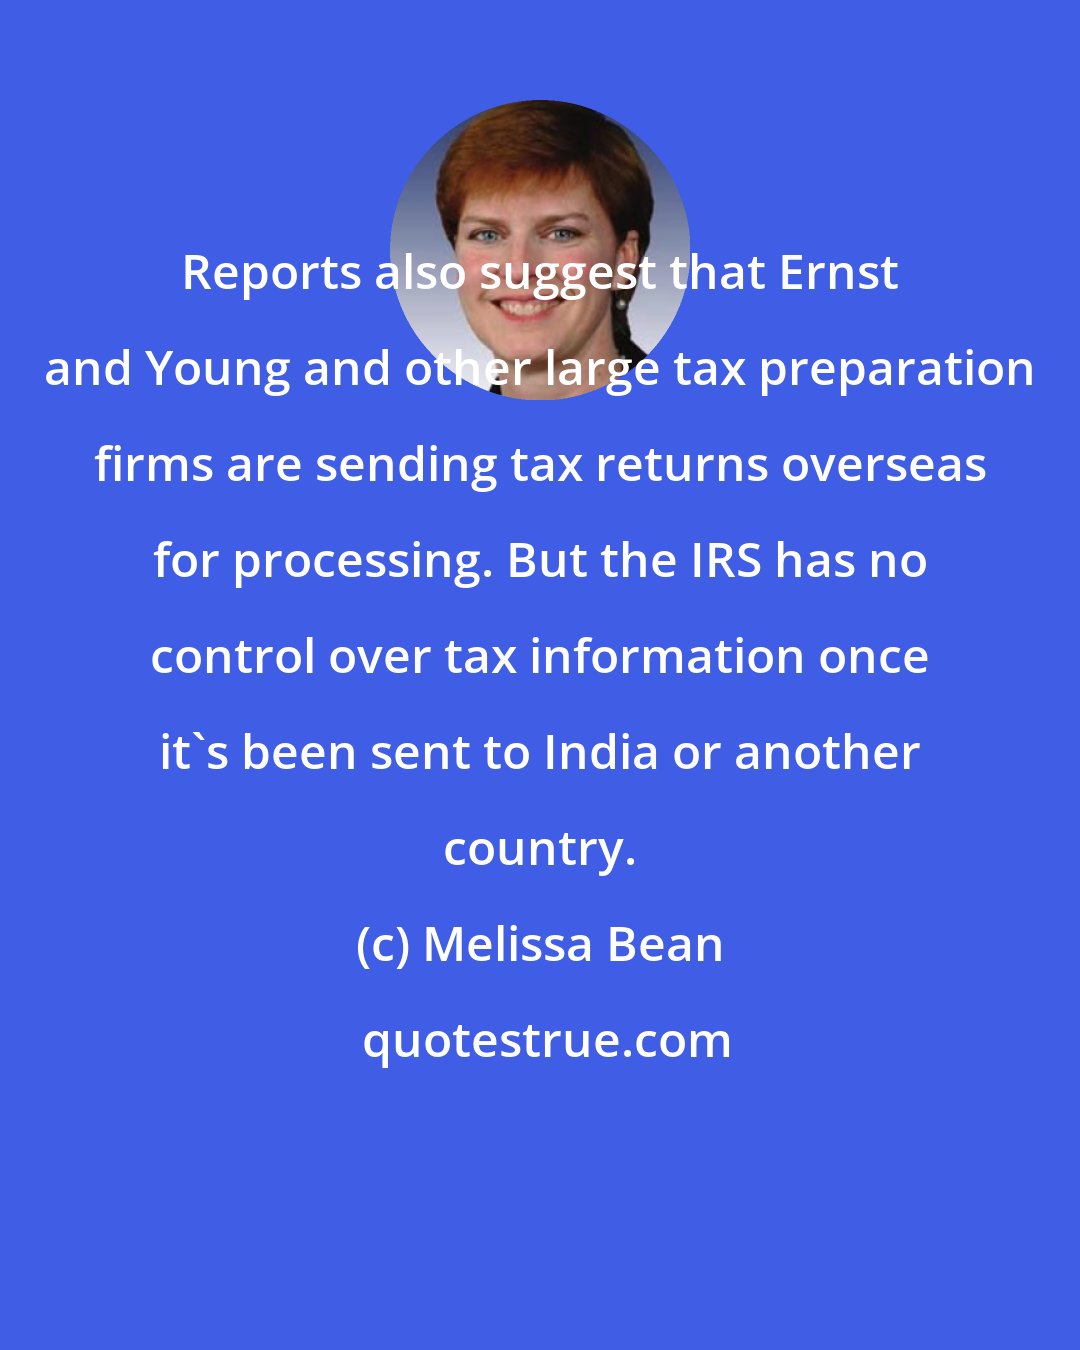 Melissa Bean: Reports also suggest that Ernst and Young and other large tax preparation firms are sending tax returns overseas for processing. But the IRS has no control over tax information once it's been sent to India or another country.